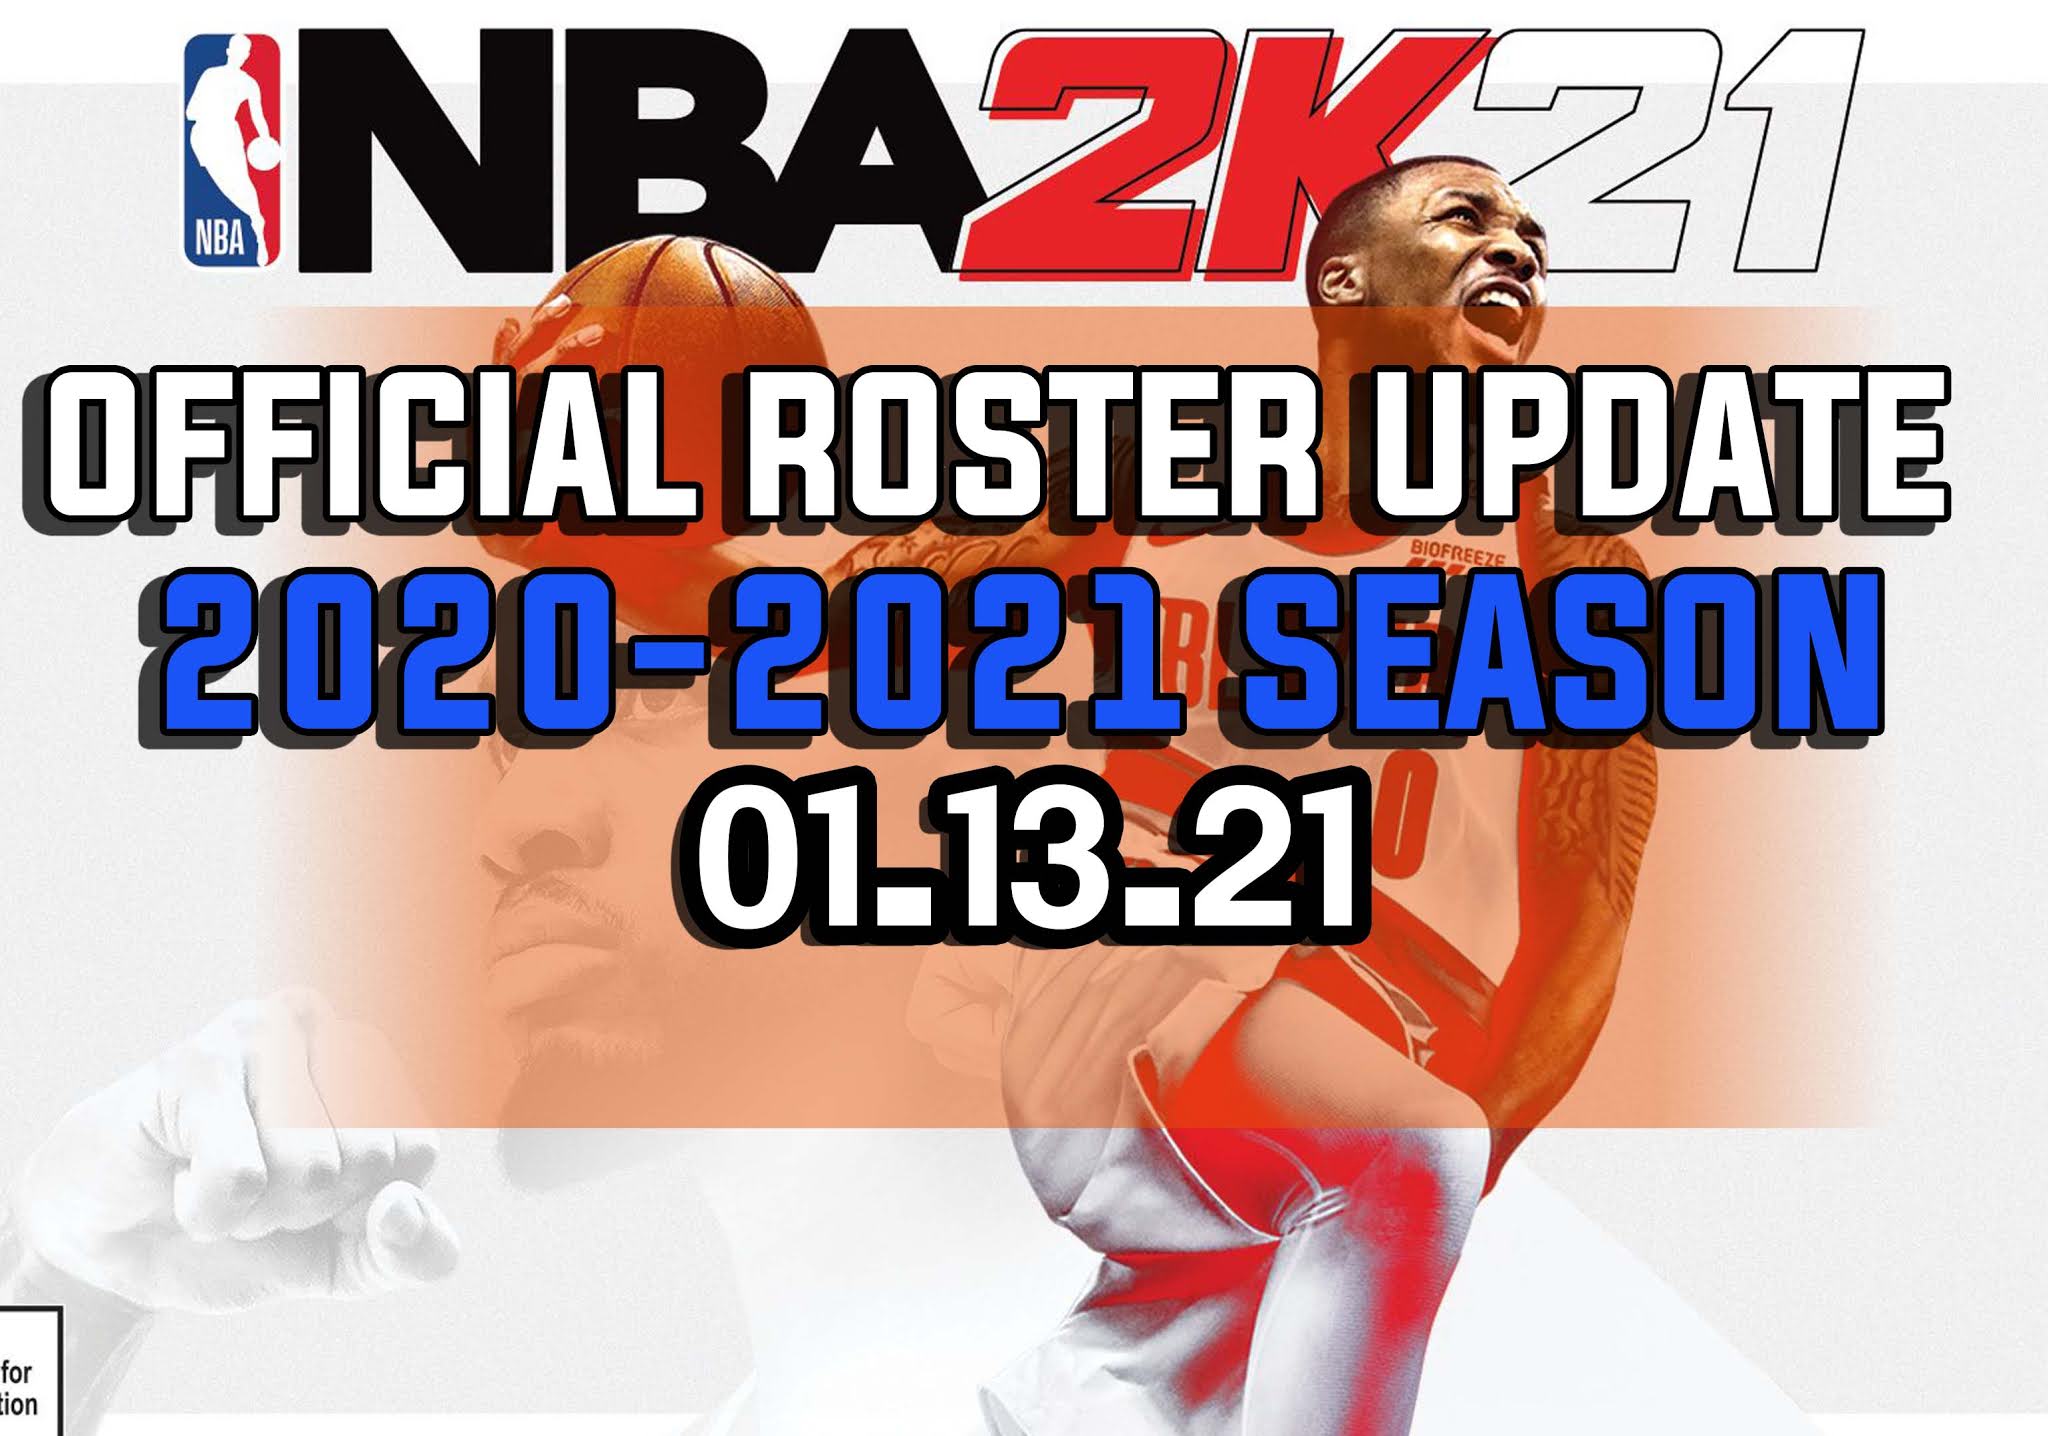 NBA 2K21 OFFICIAL ROSTER UPDATE 01.13.21 LATEST TRANSACTIONS + INJURY